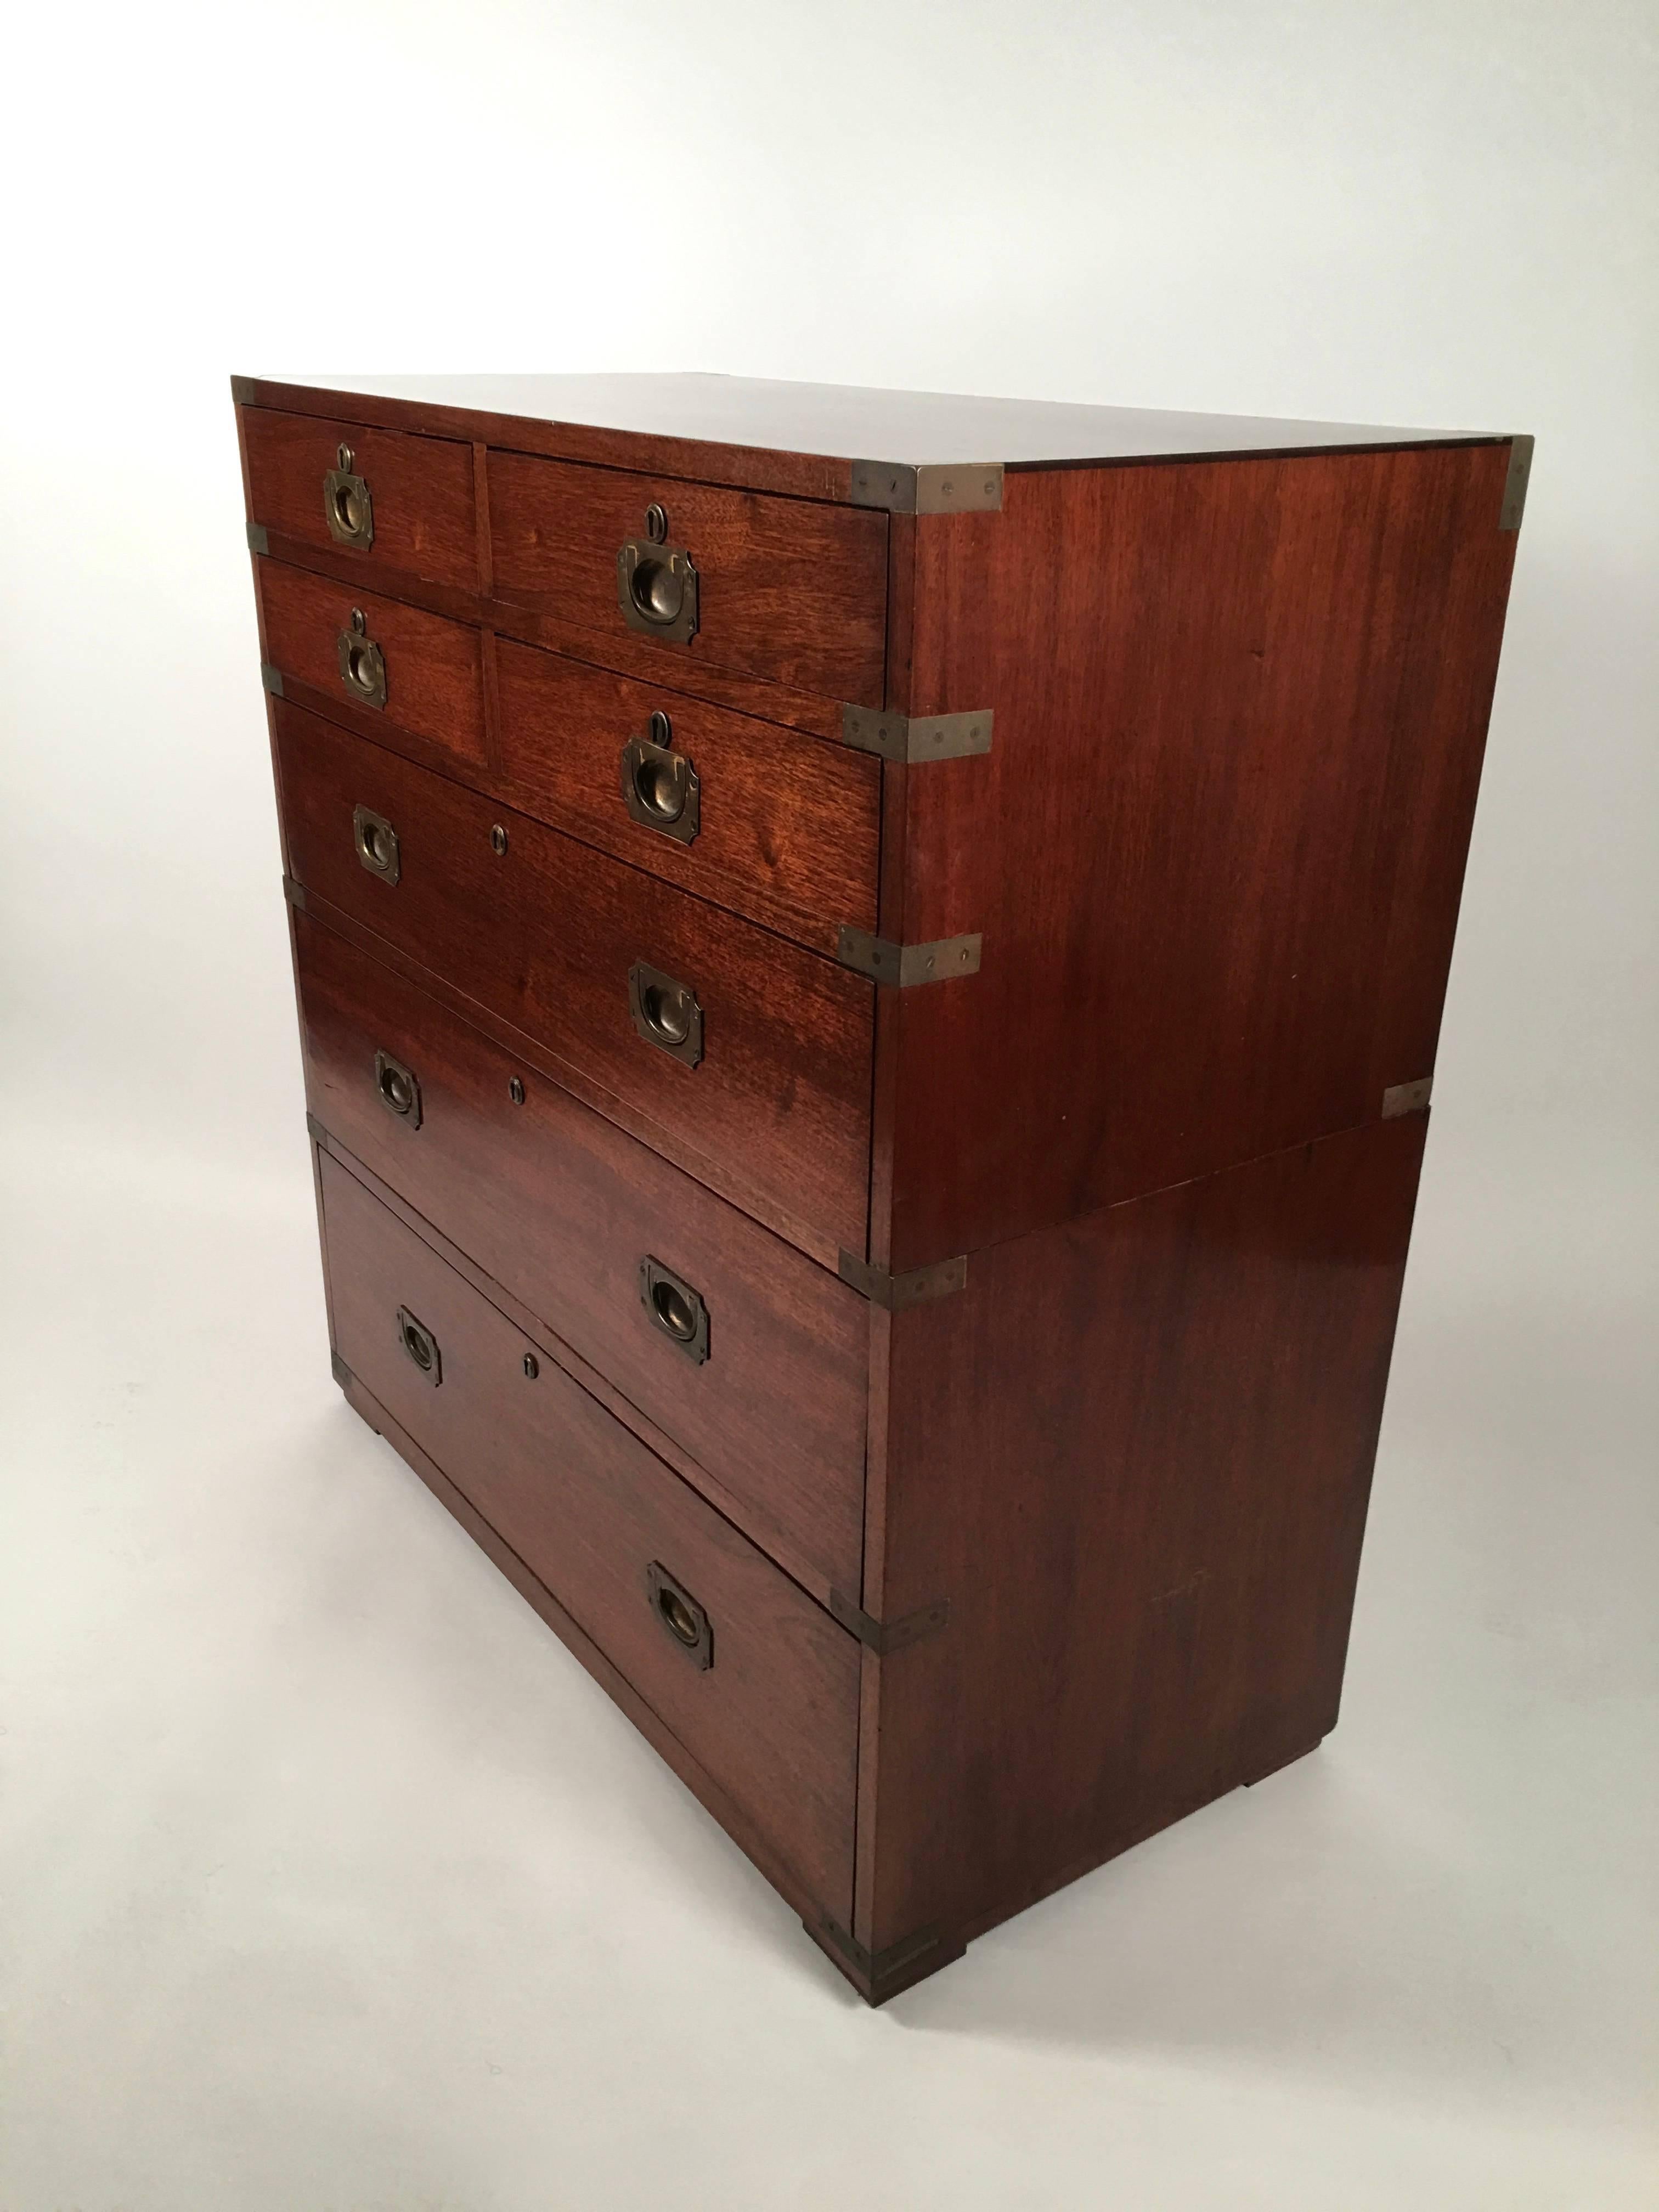 A fine quality Irish Campaign chest in mahogany, with Ross & Co., Ireland plaque inside a top drawer, late 19th century, of rectangular form, with brass corner mounts and brass pulls, and with four short drawers over three long drawers. Brass locks